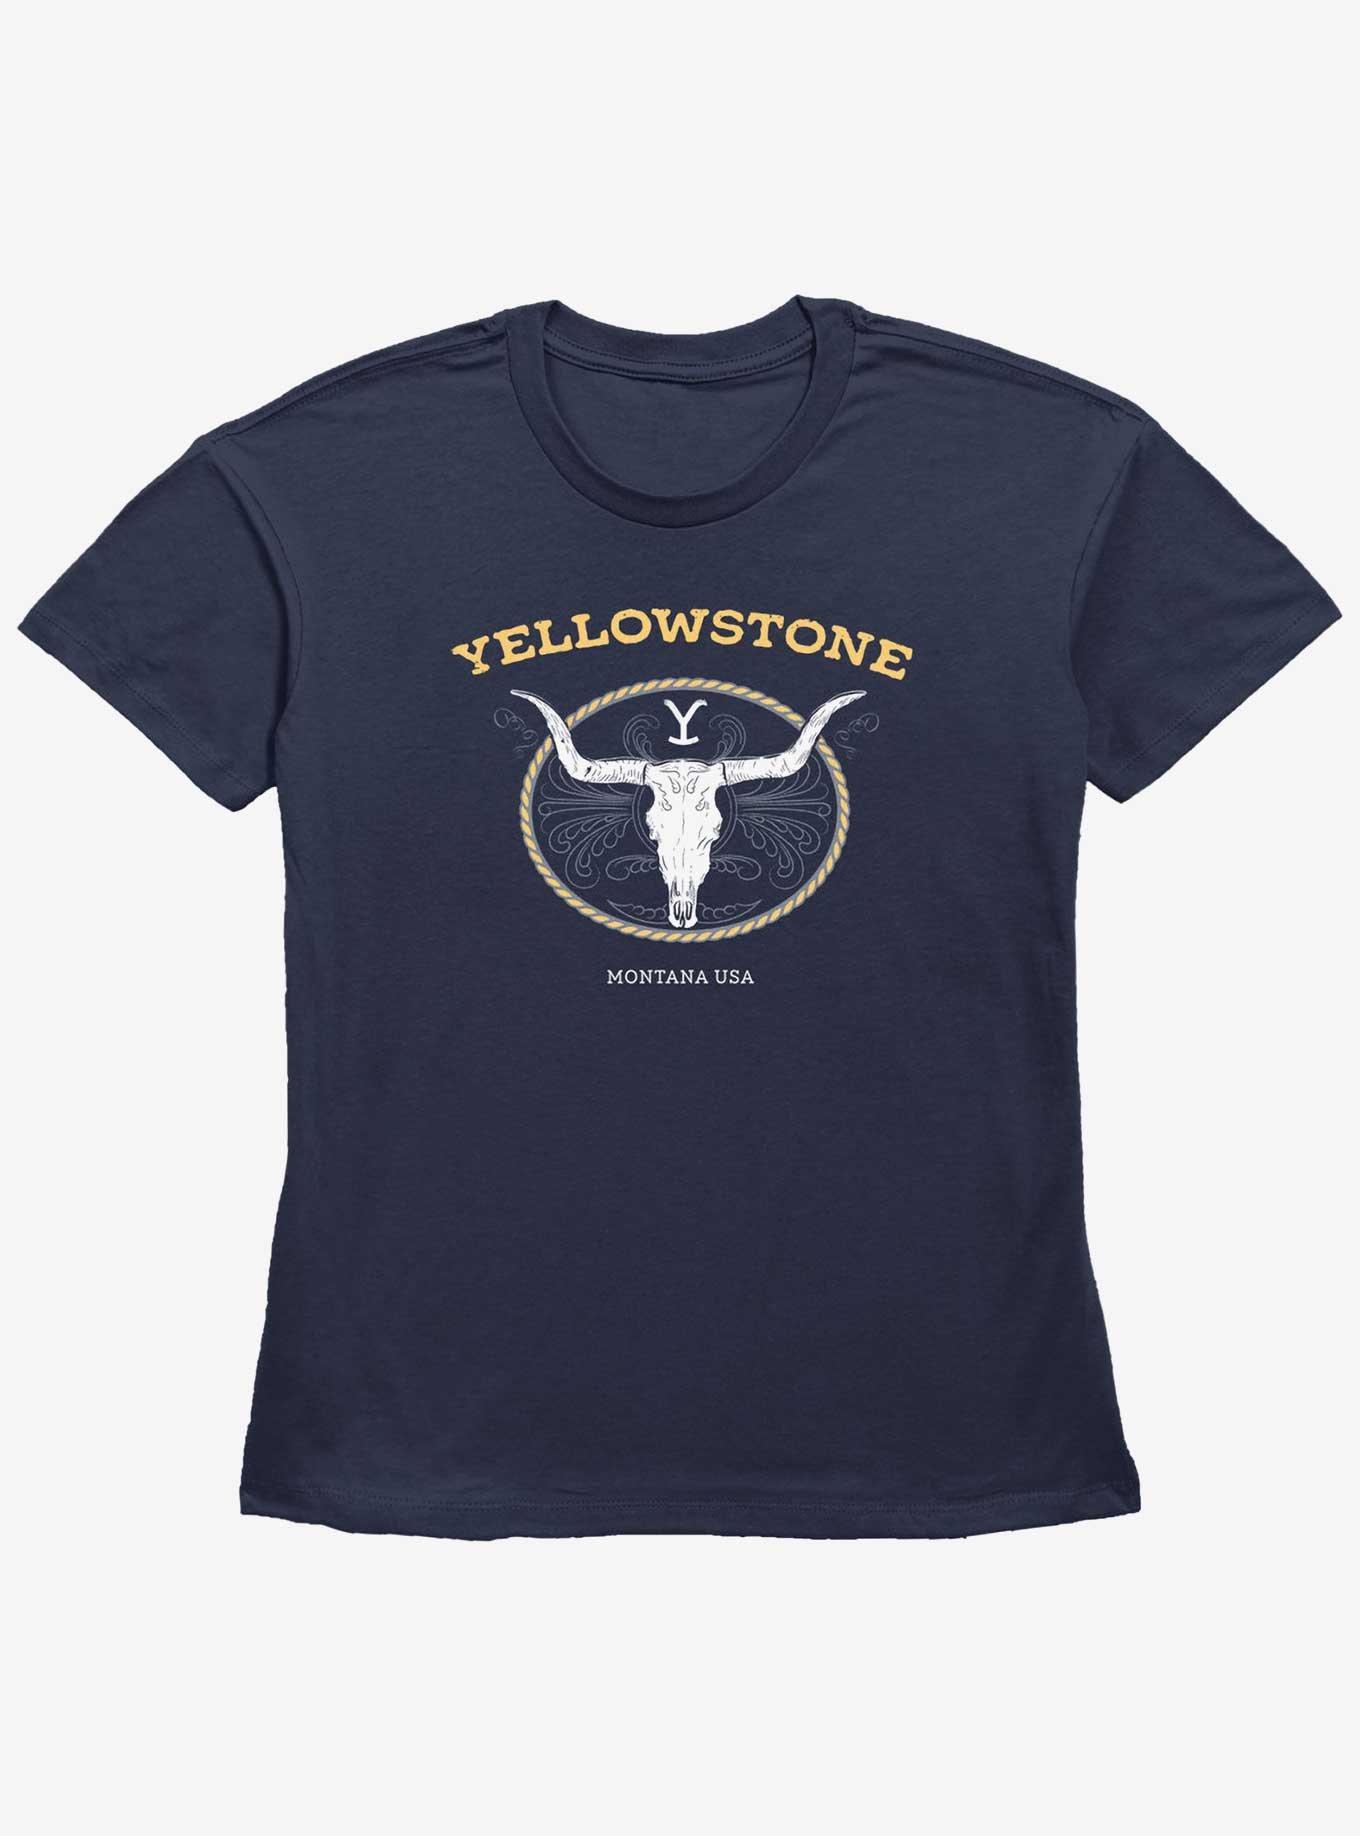 Yellowstone Cattle Logo Girls Straight Fit T-Shirt, NAVY, hi-res